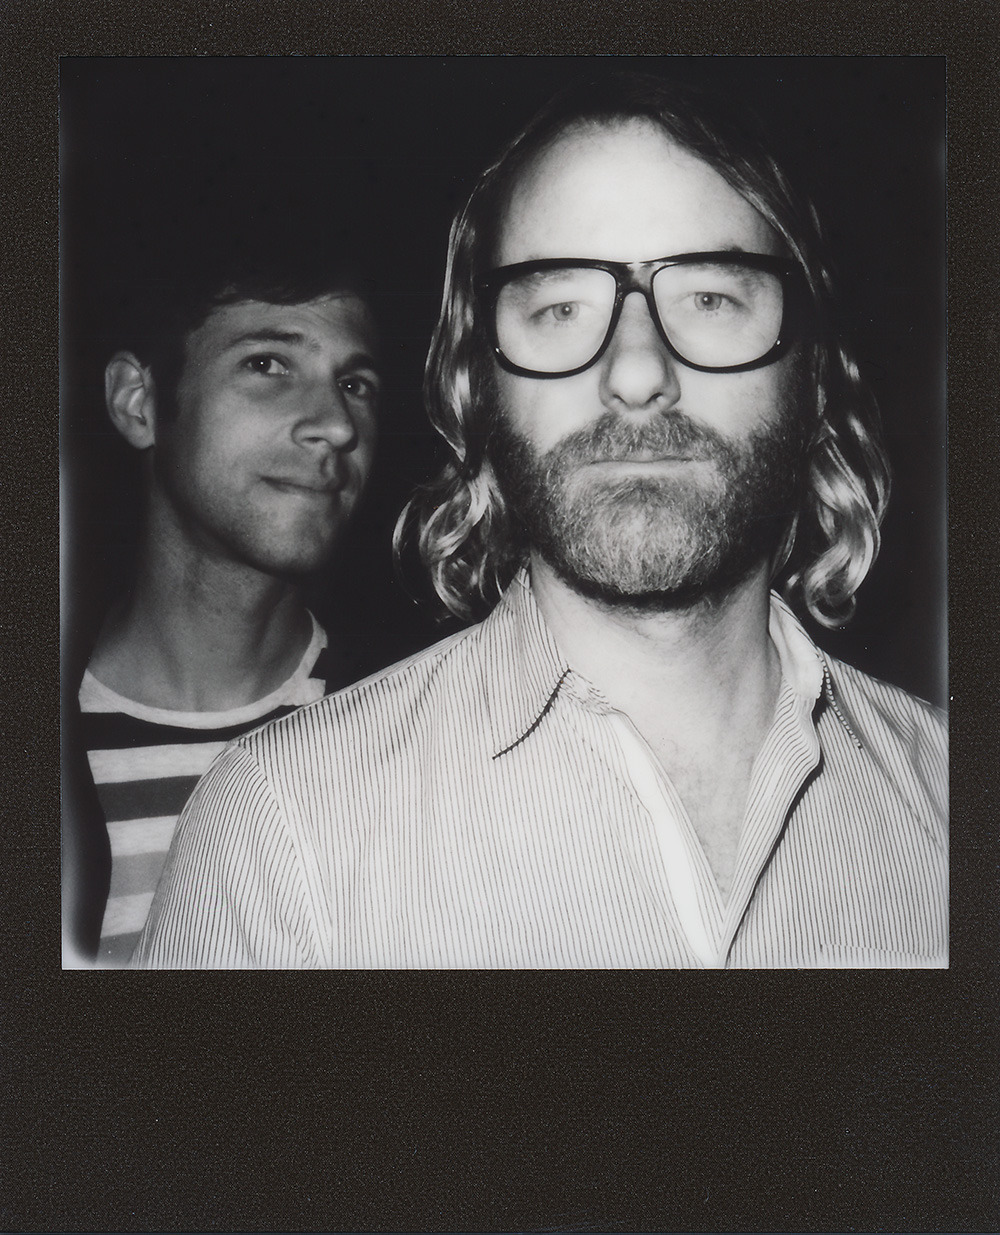 fckyeah-elvy:  Polaroids with EL VY “We caught up with Matt Berninger and Brent